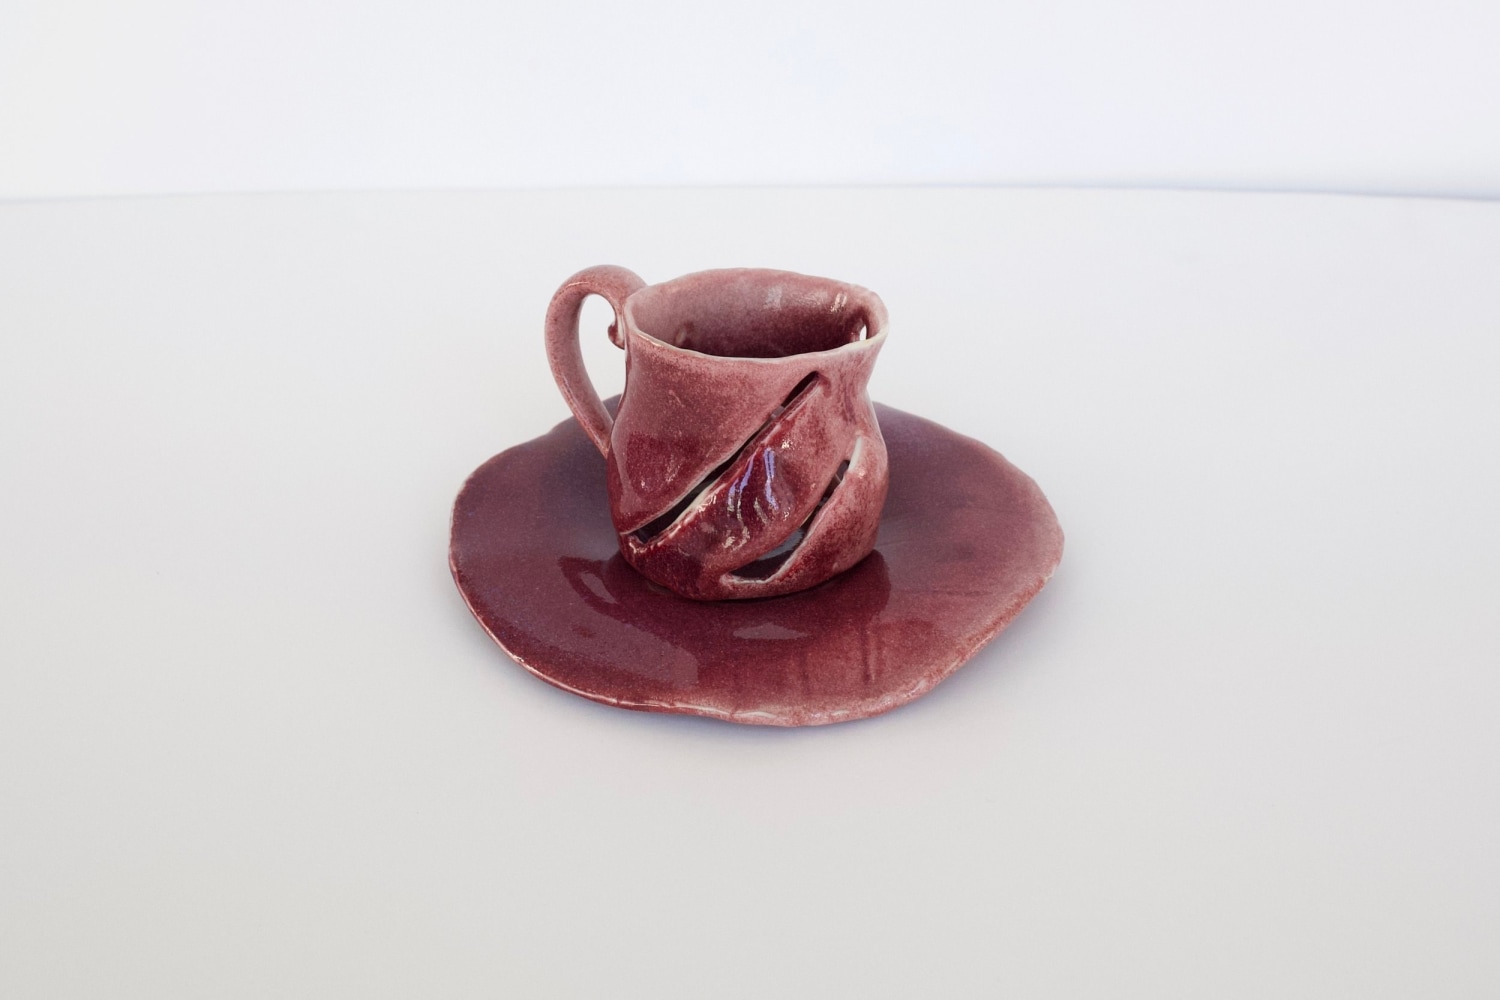 First It&amp;#39;s Purple And Concentrated, 2019
Porcelain
3.5&amp;nbsp;x 6 x 6.5&amp;nbsp;inches